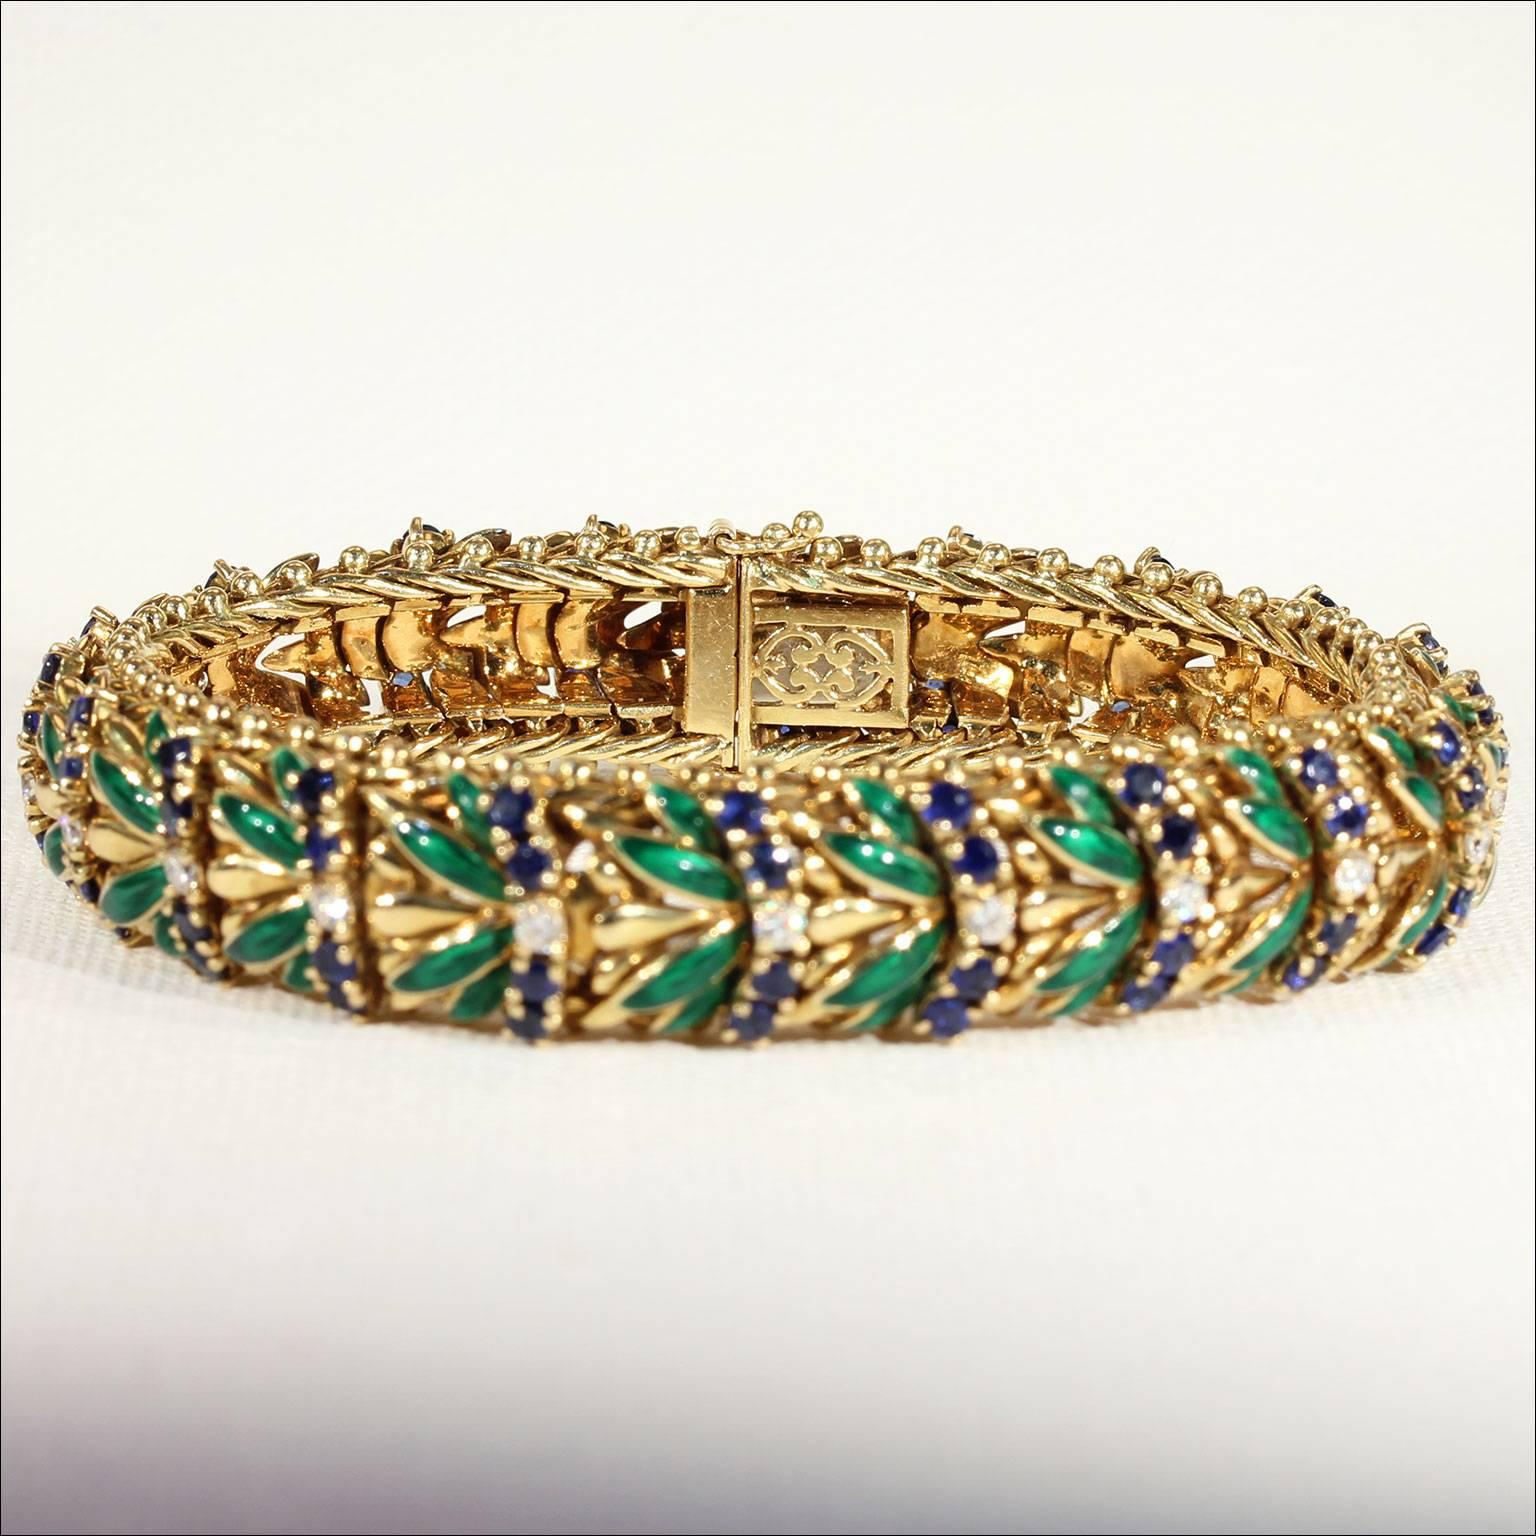 This fabulously hand crafted bracelet was made in Italy in the mid-late 1960’s. It comes to me from the estate of the author Svetlana Iosifovna Alliluyeva, and was given to her by her husband, Wes Peters, who was a talented architect and Frank Lloyd